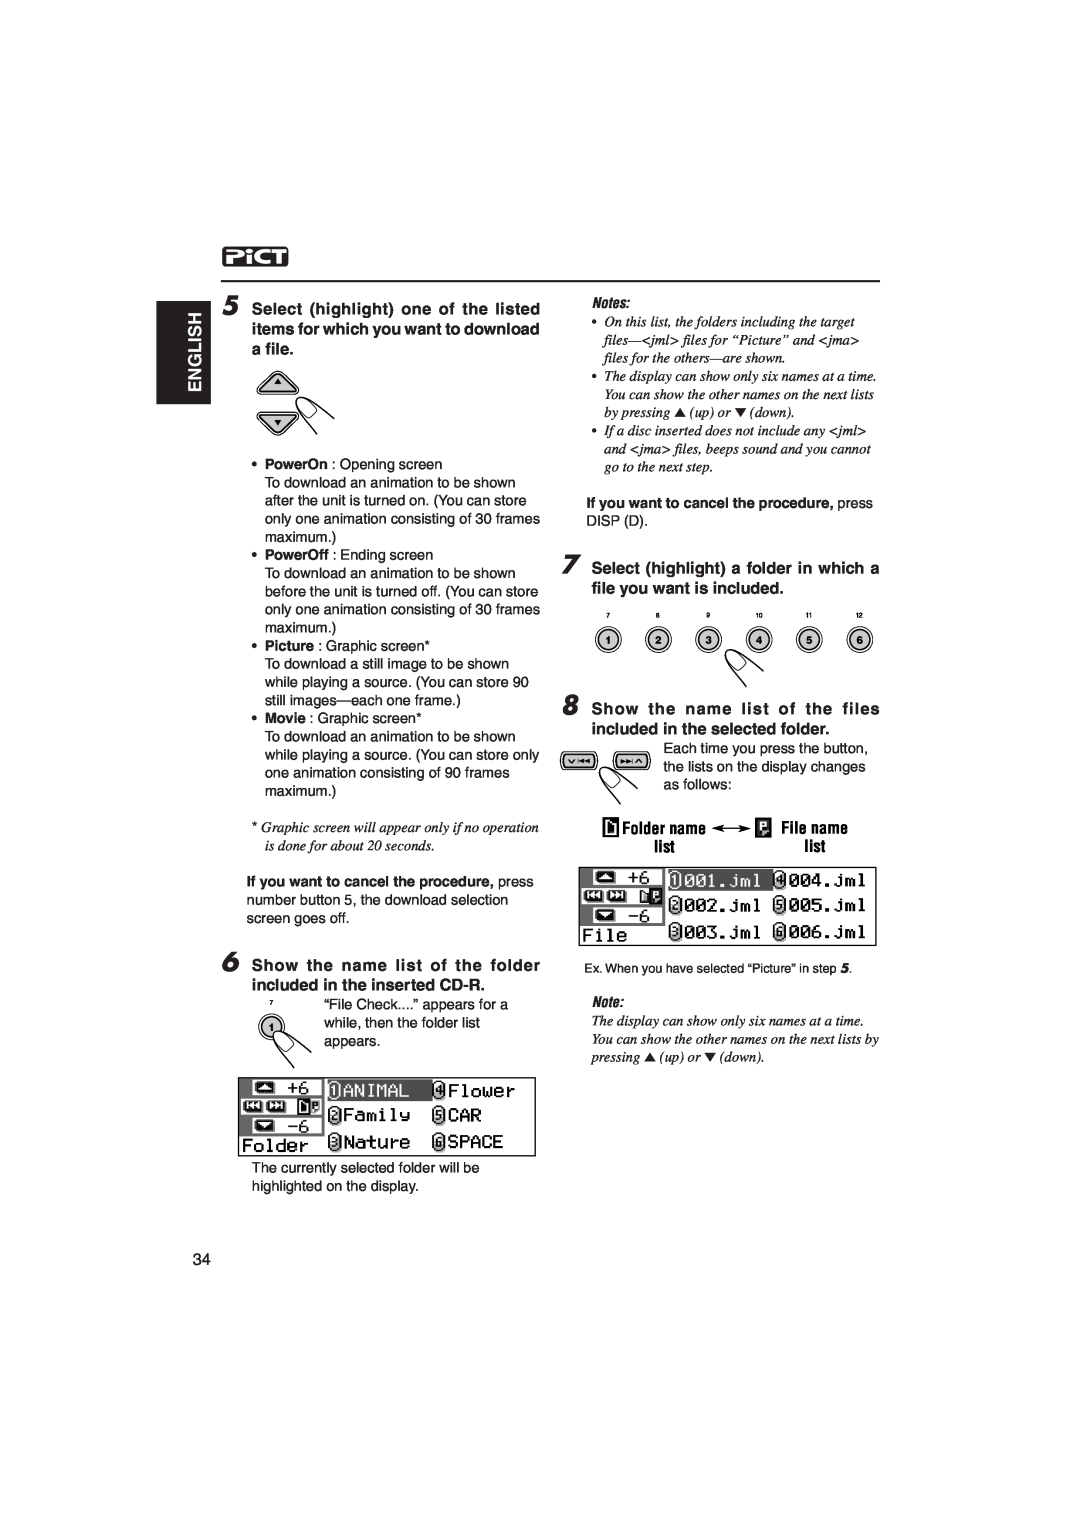 JVC KD-SH9105 manual English, Select highlight one of the listed, items for which you want to download, a file, File name 